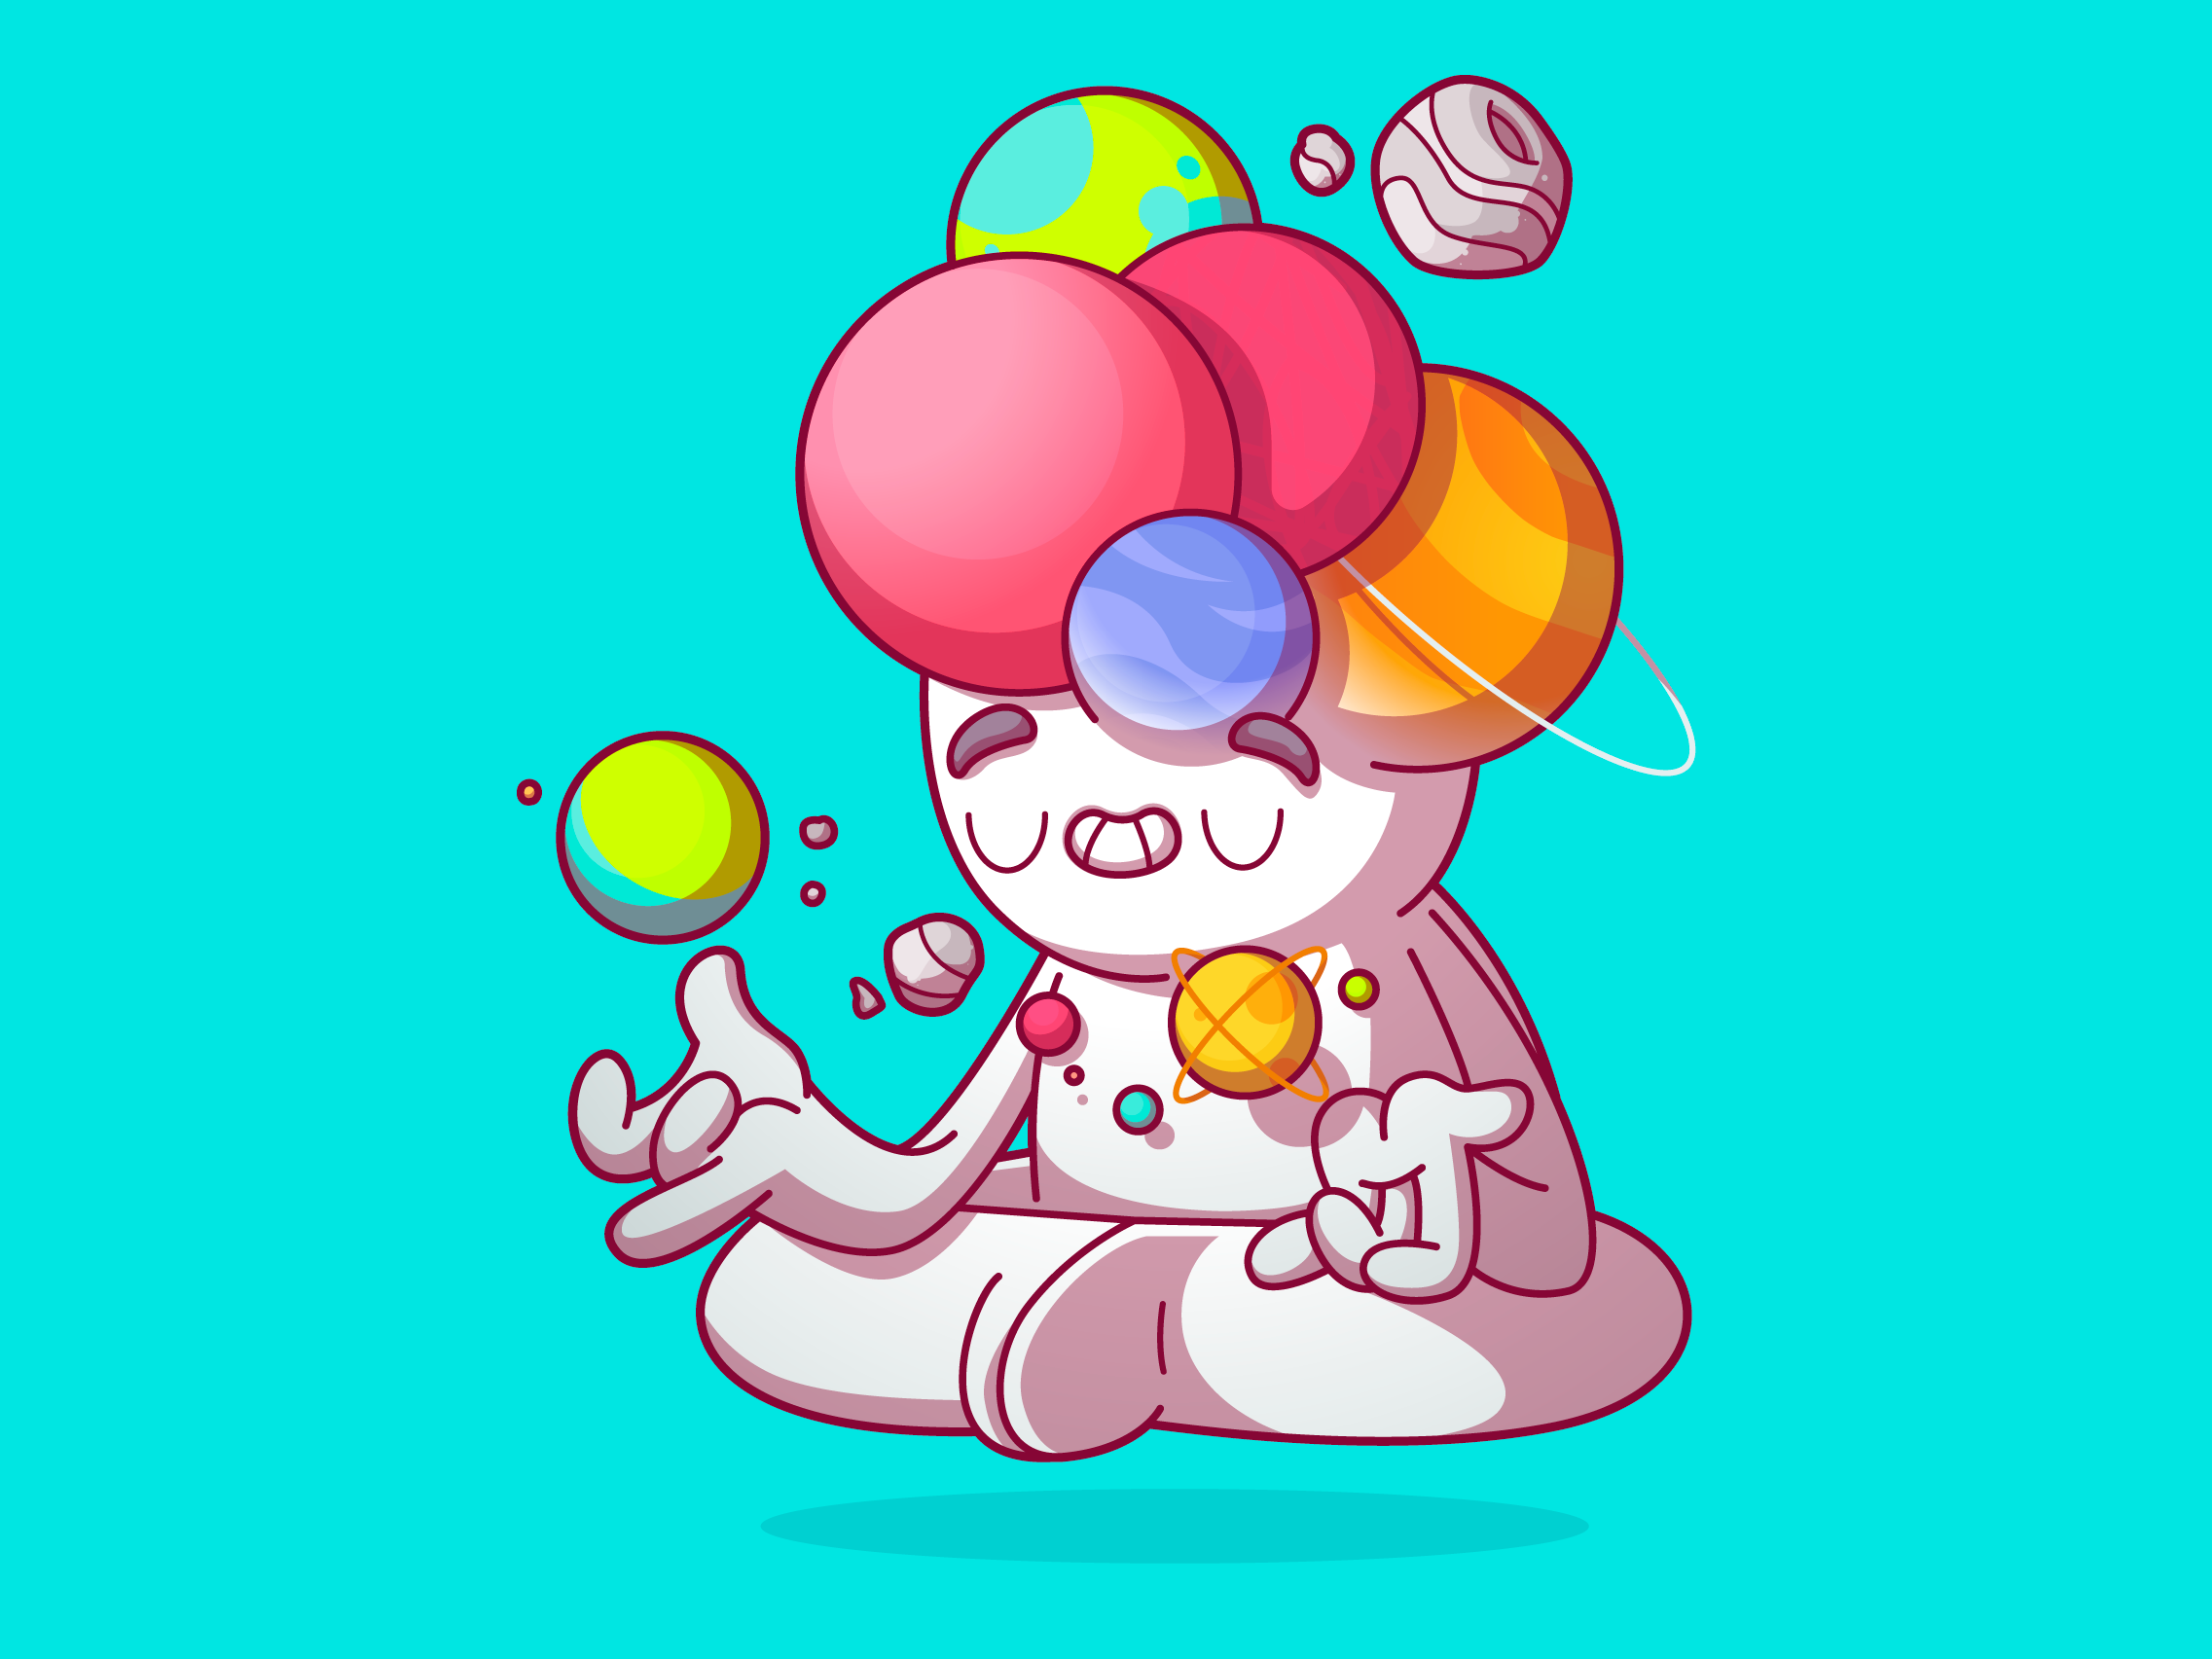 Create Your Own Universe by Thunder Rockets on Dribbble